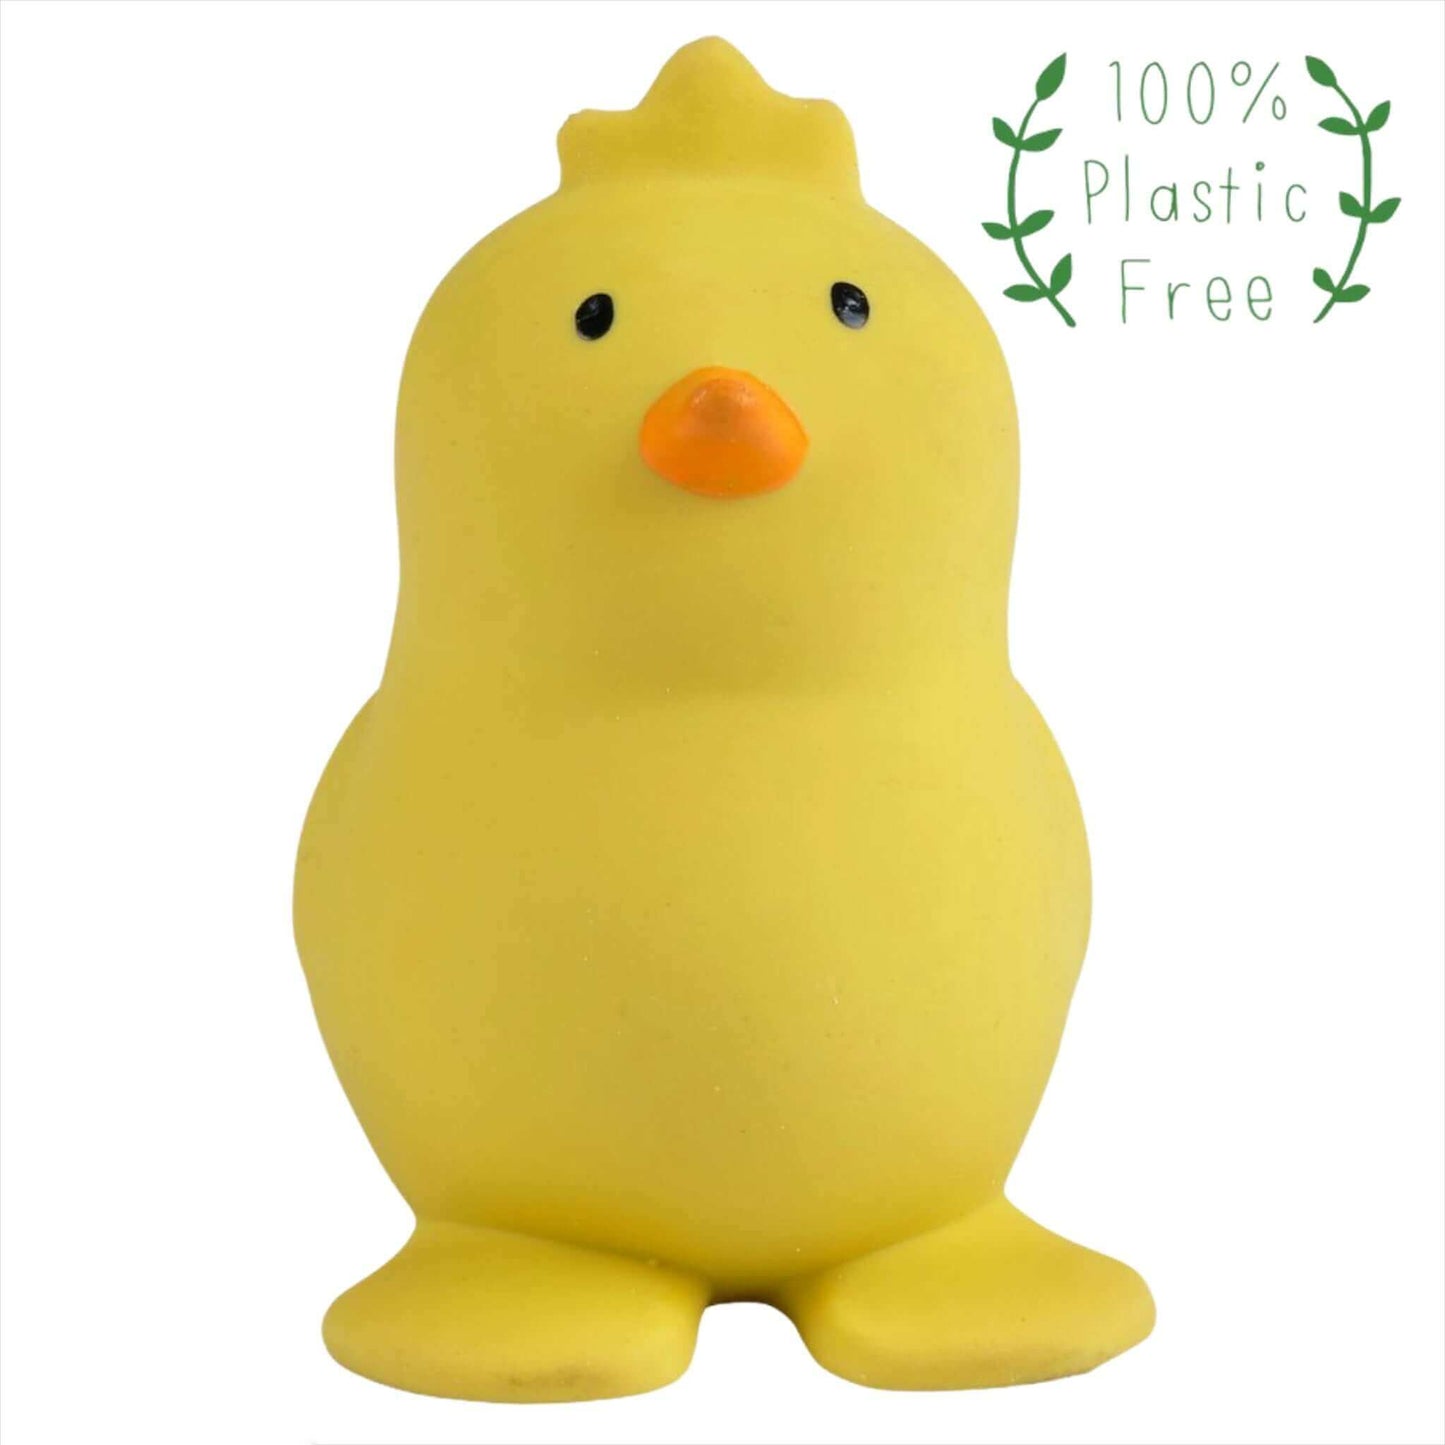 Natural Rubber My First Farm- Chick Teething Toy